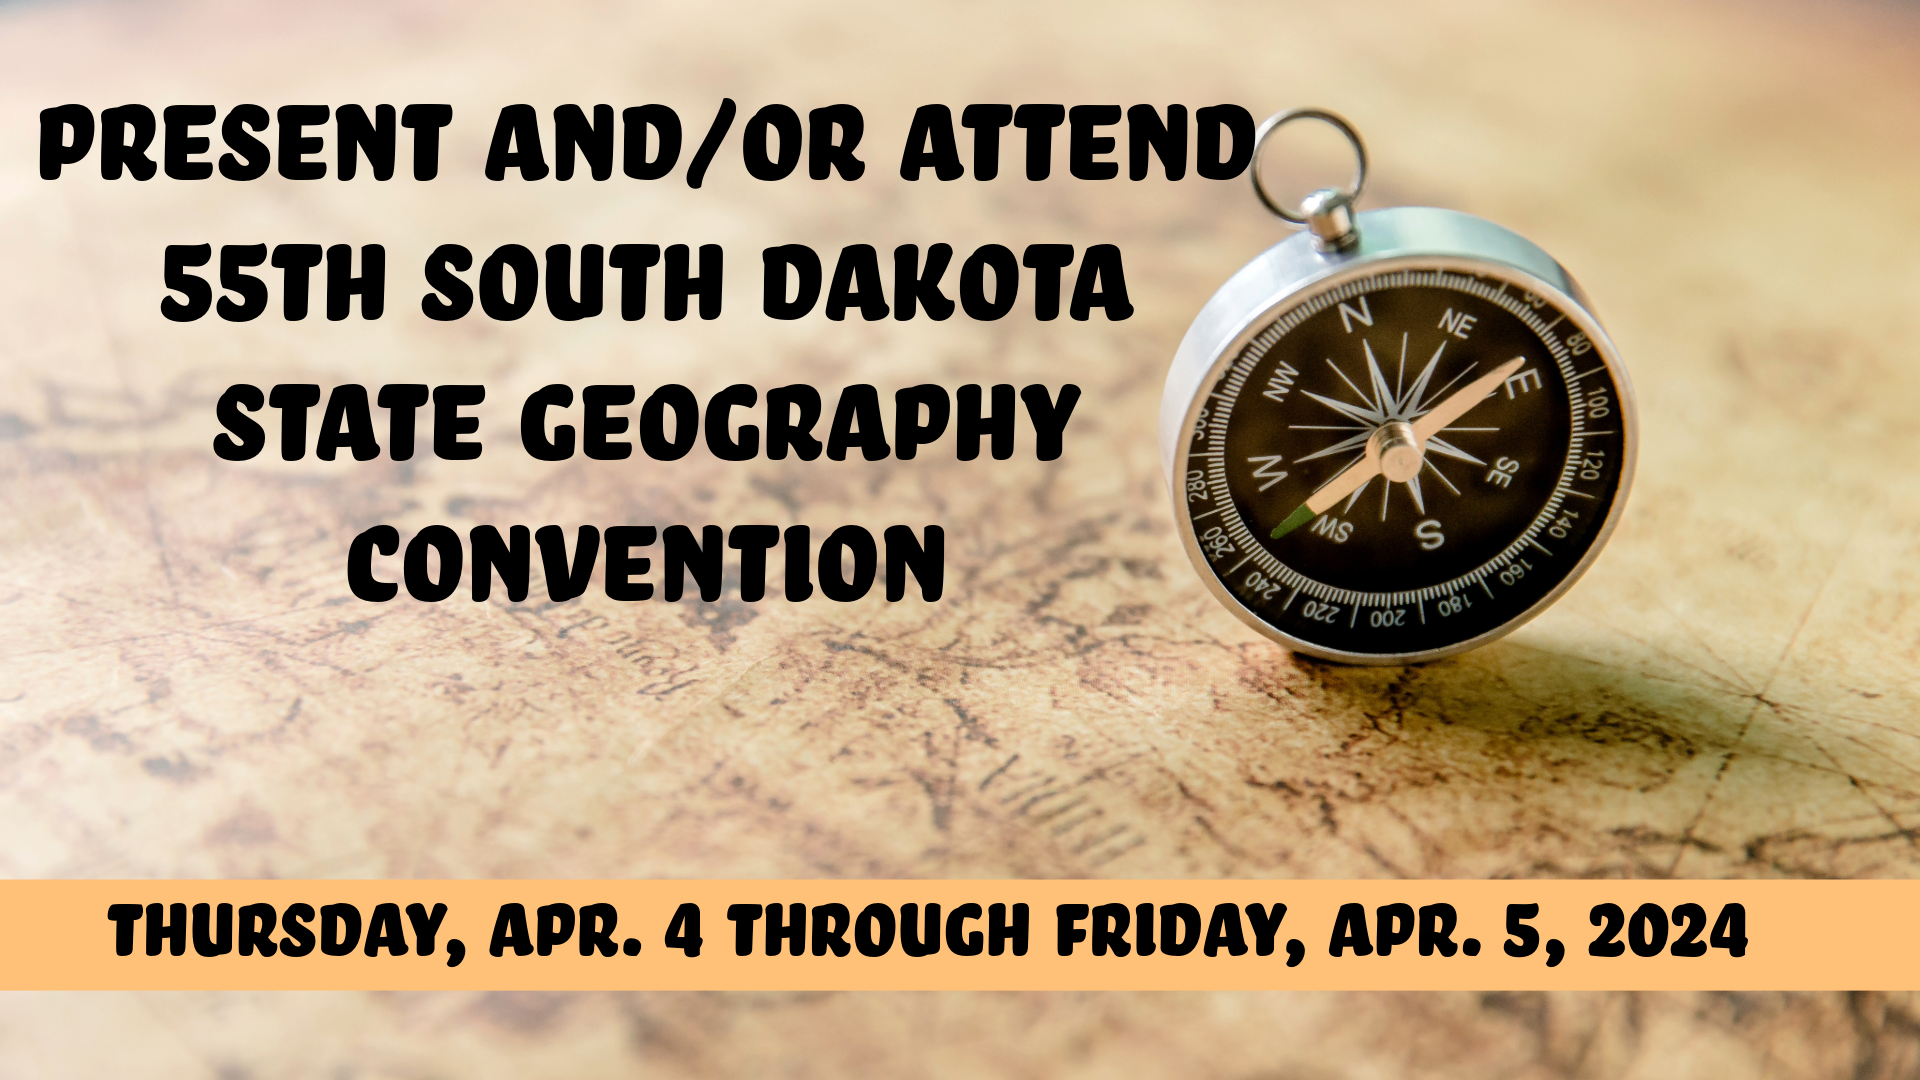 55th Geography Convention at South Dakota State